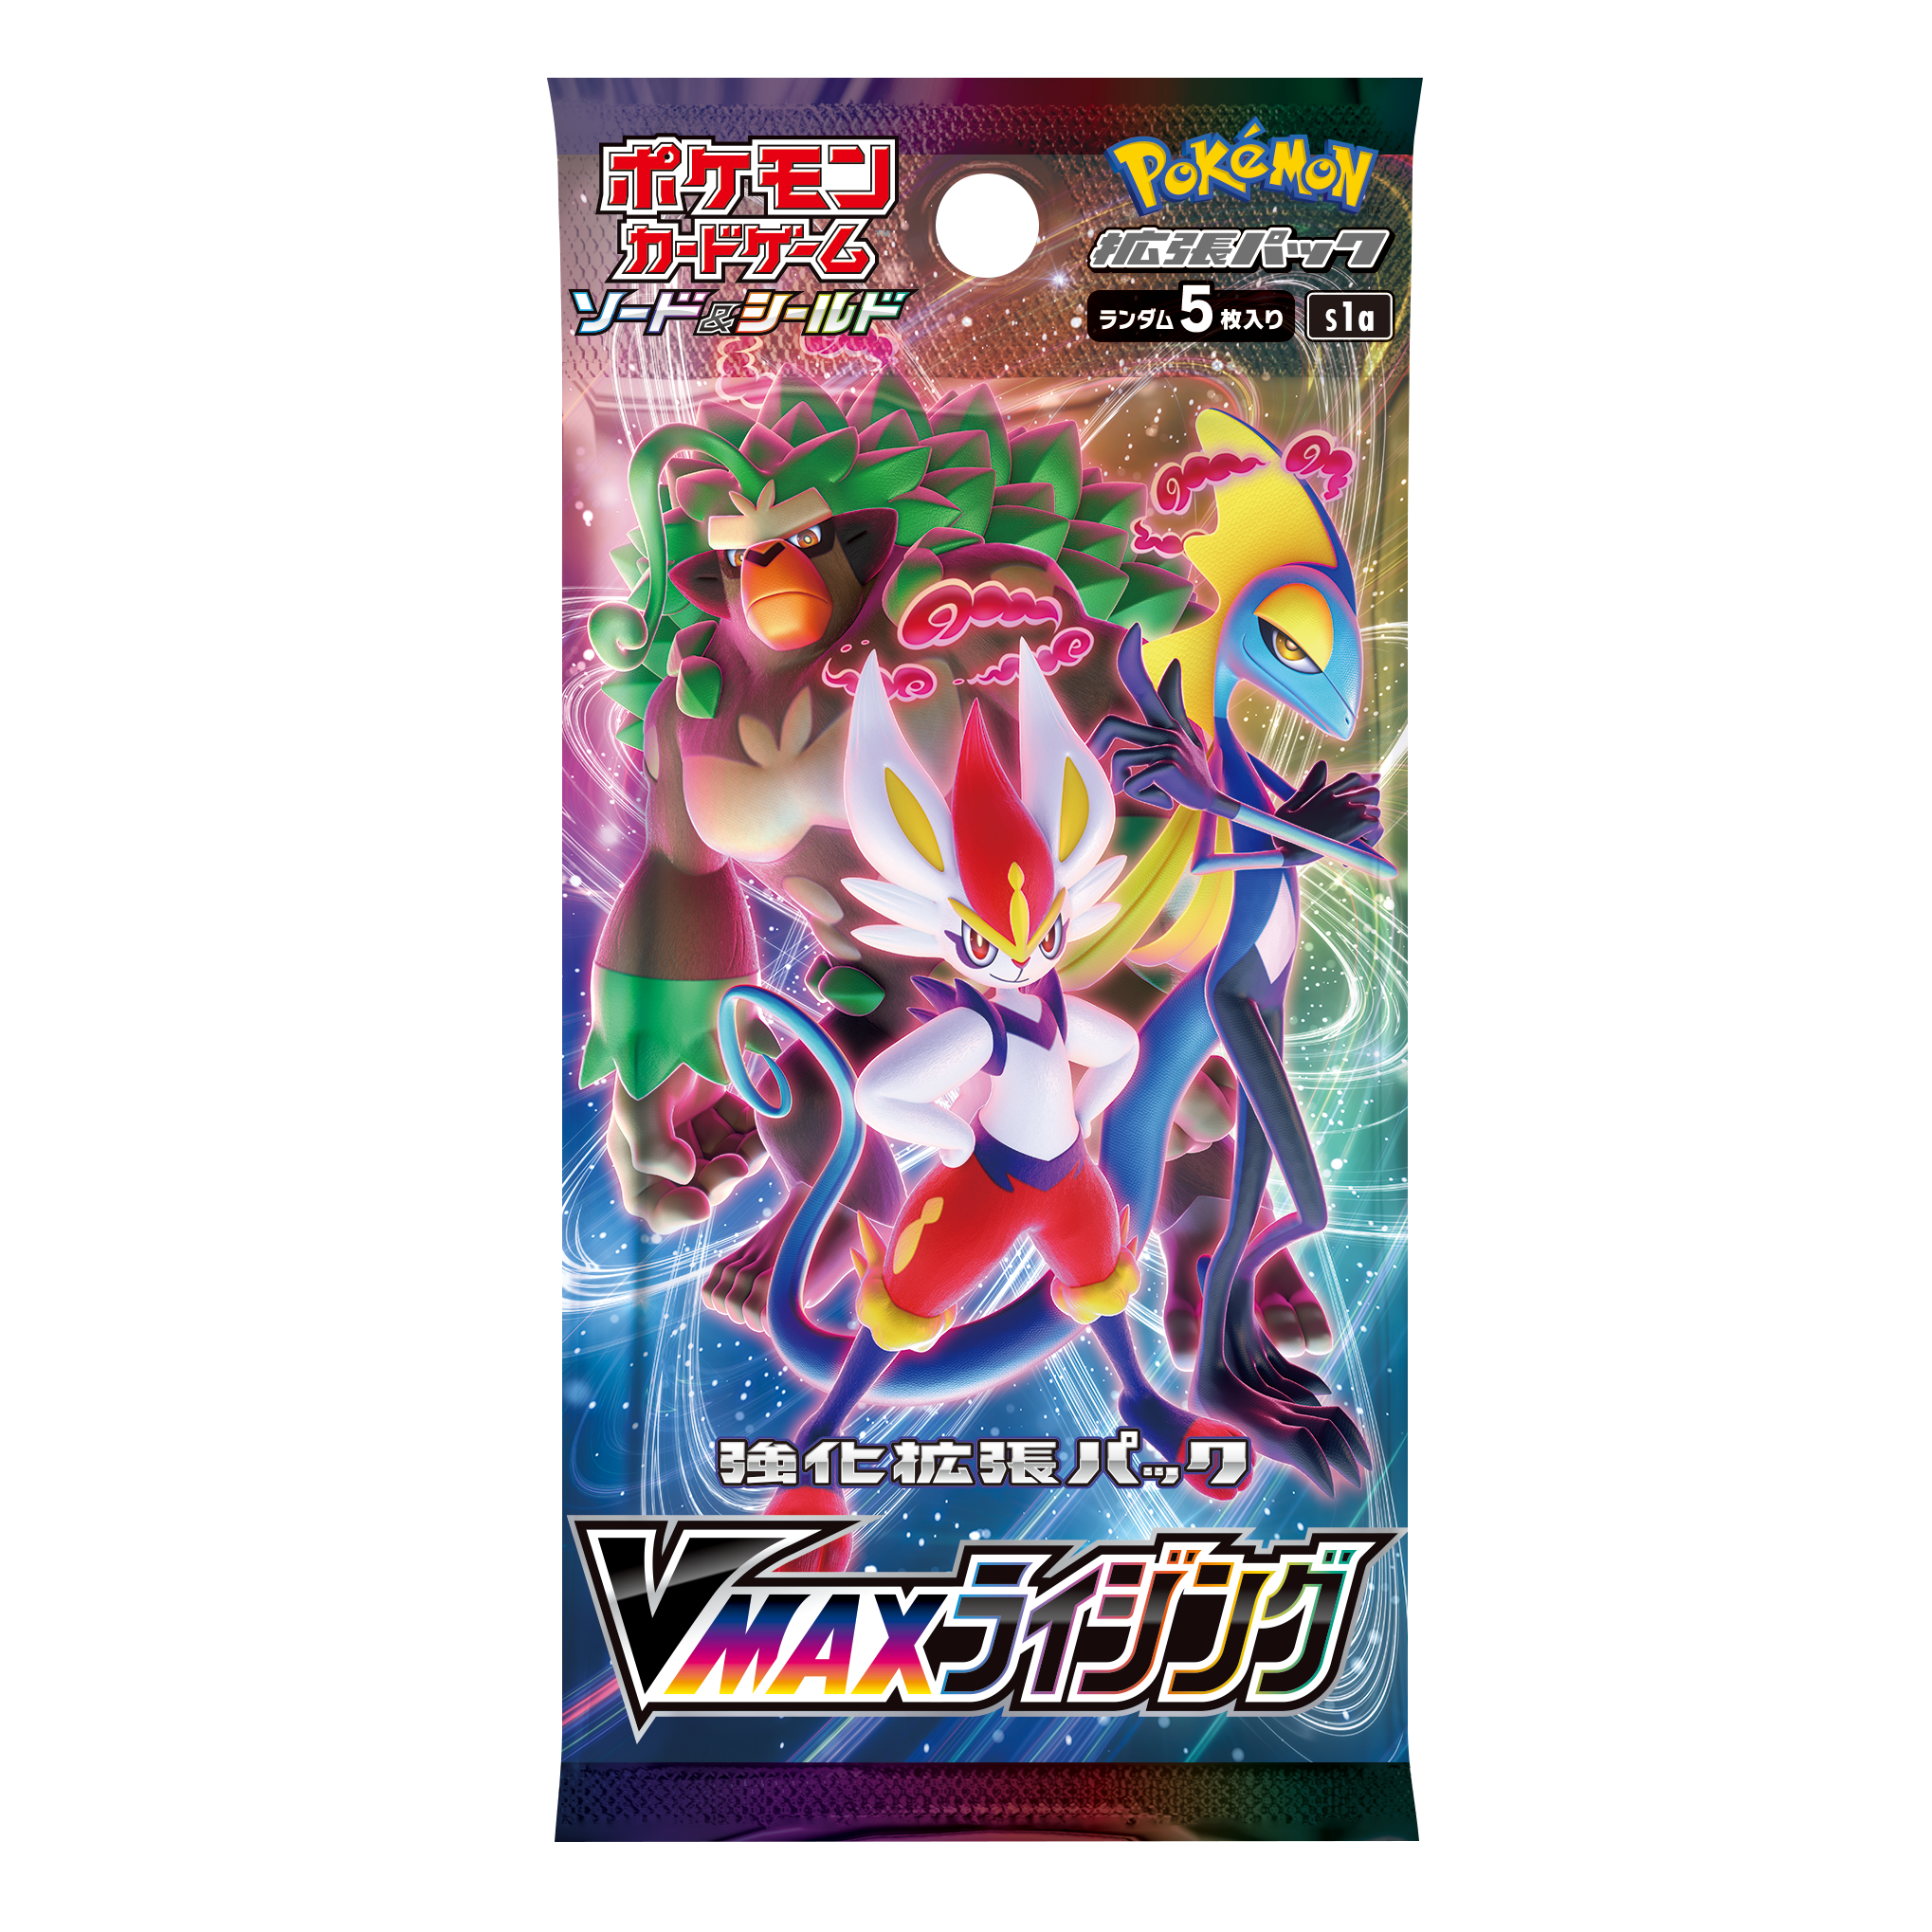 www.pokemon-card.com/products/2020/images/1405_S1a